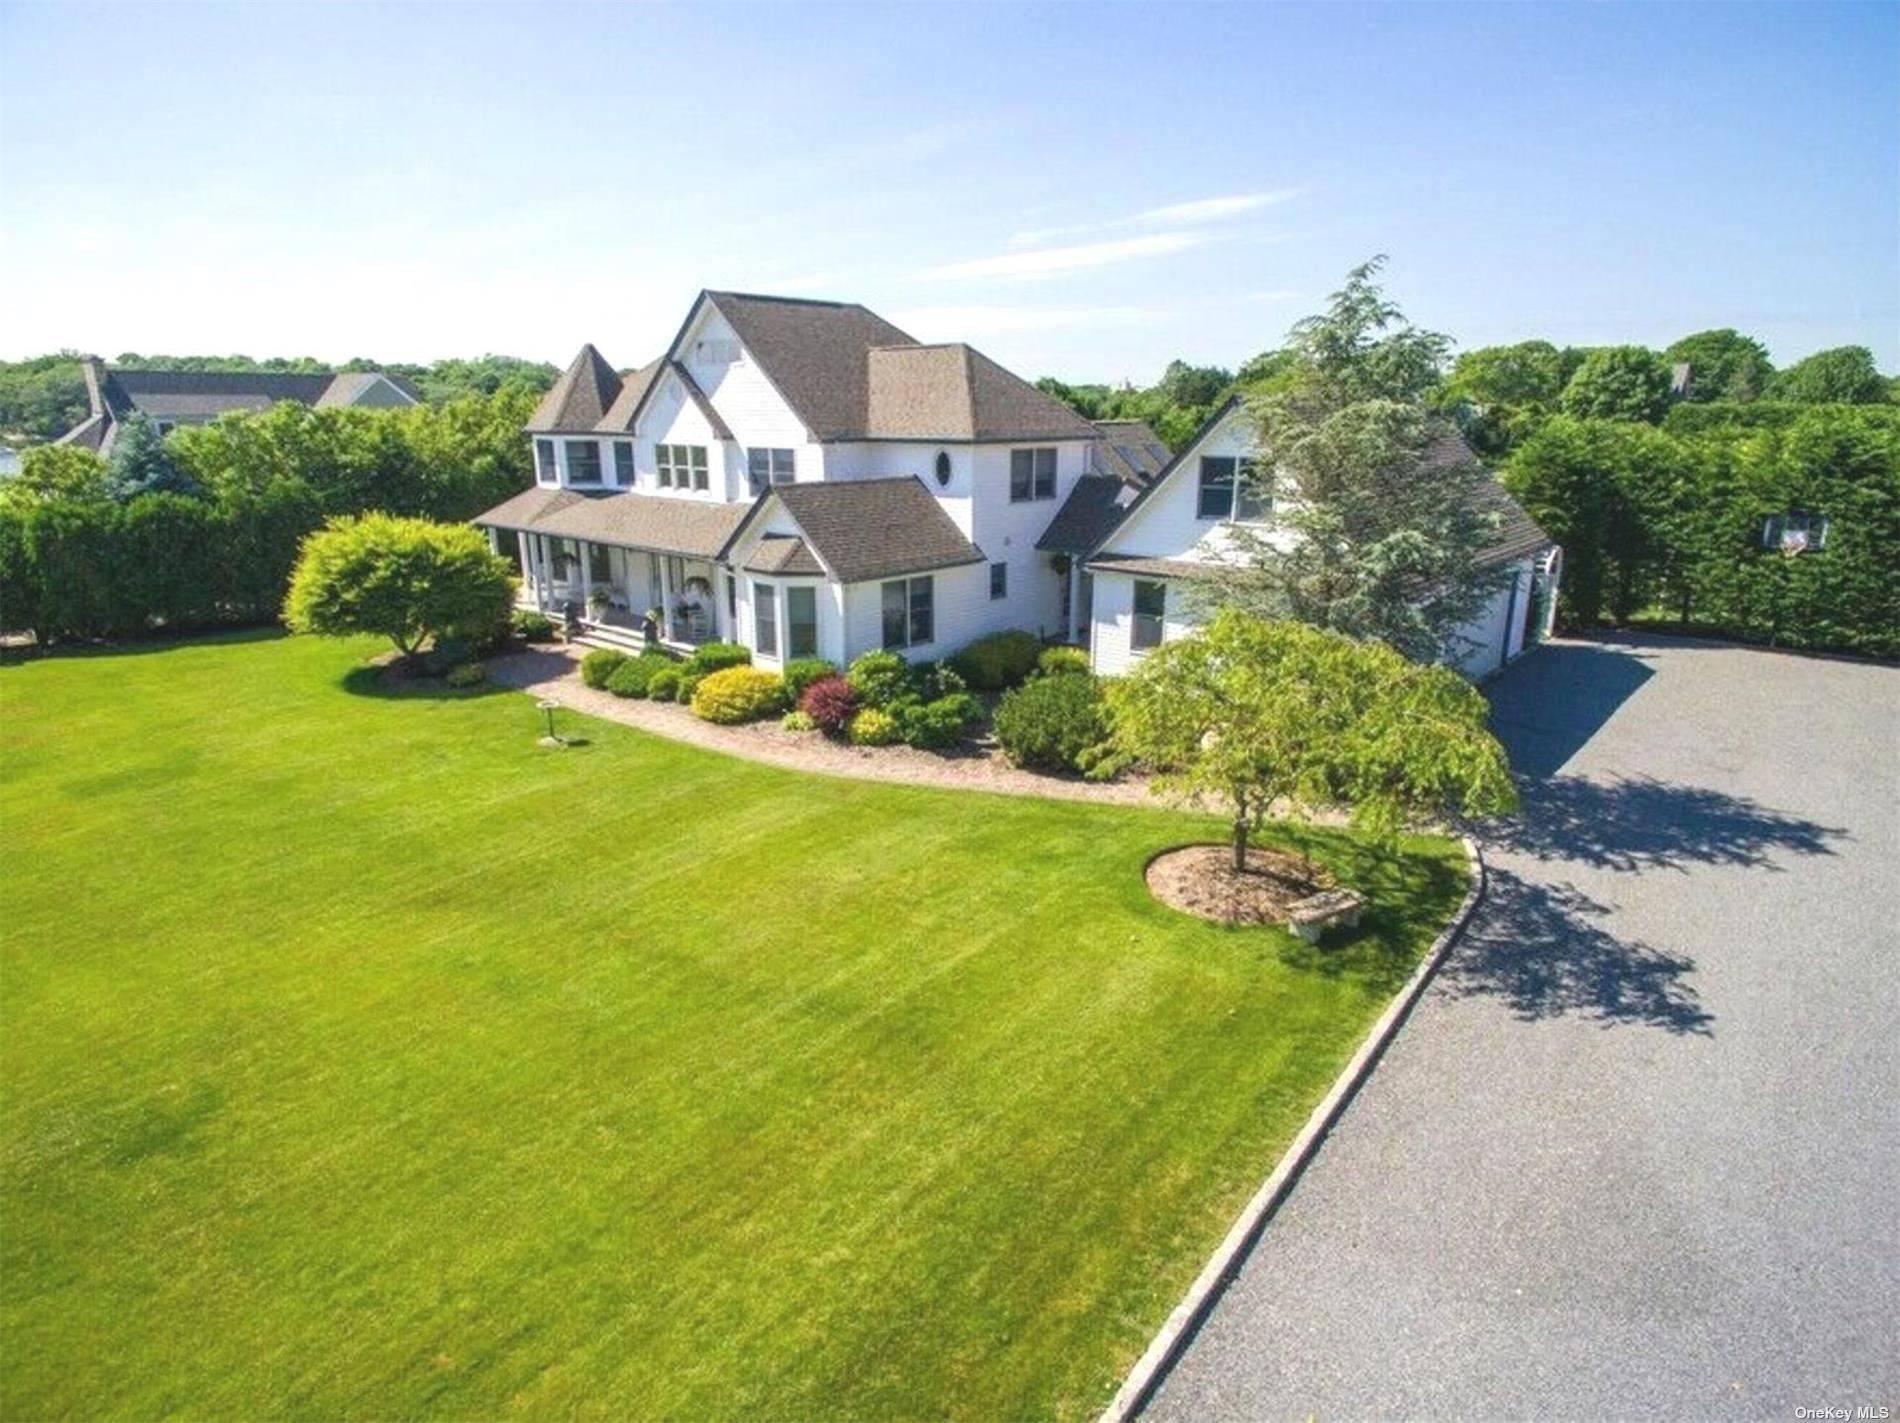 Nestled in the western edge of the Town of Southampton, on just over an acre and a half of land, sits this immaculate two story traditional.